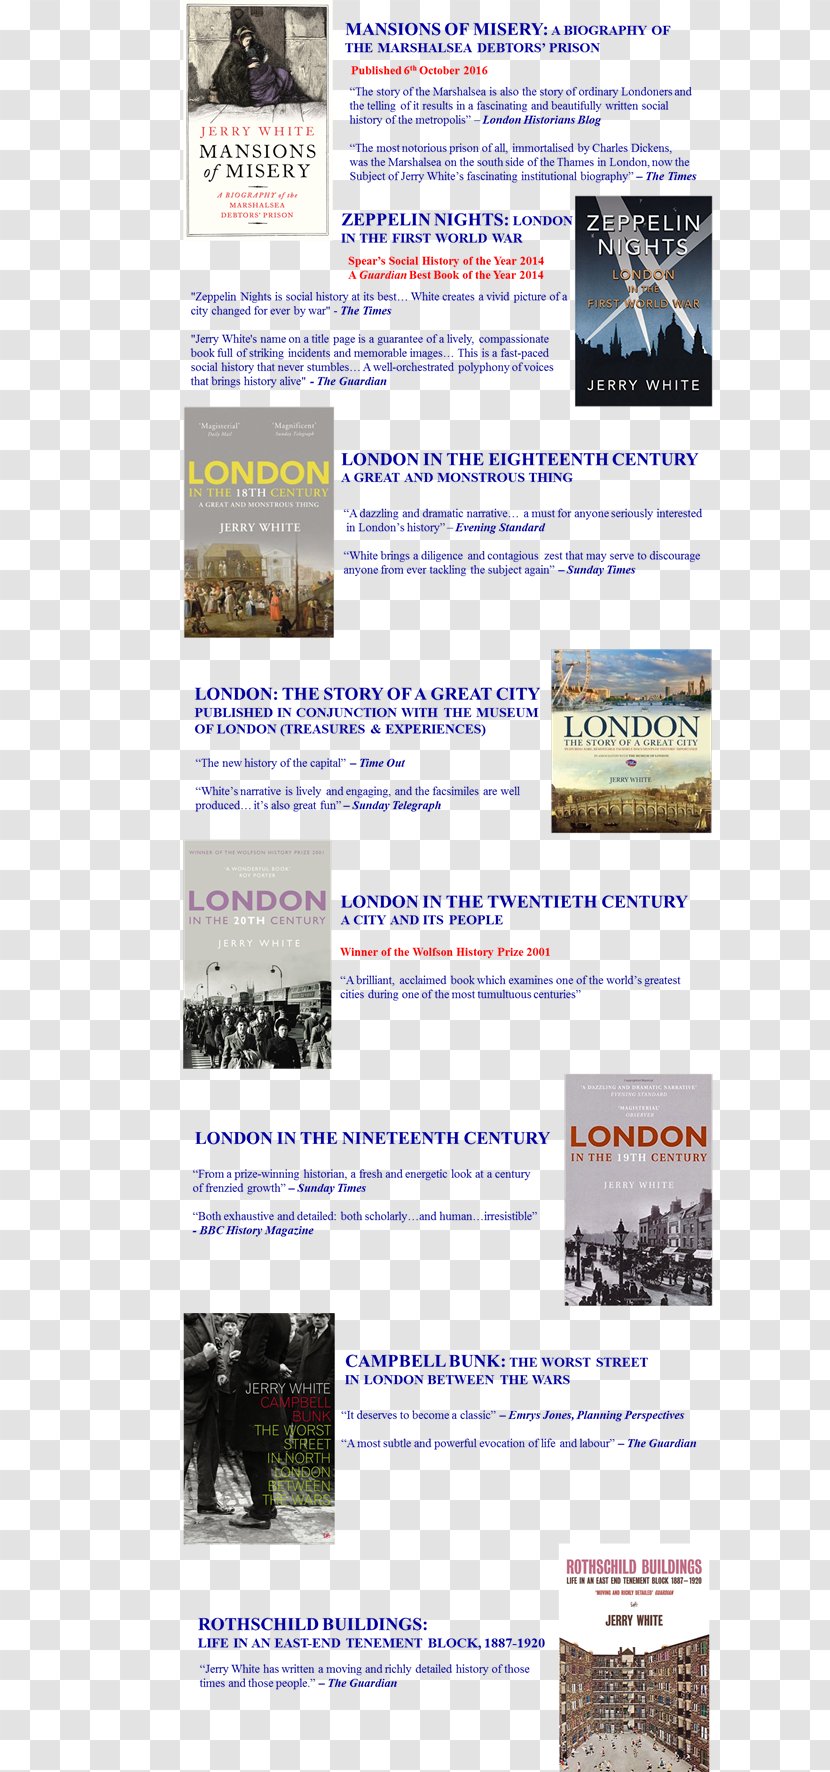 Mansions Of Misery: A Biography The Marshalsea Debtors' Prison London In Twentieth Century: City And Its People Book Brochure Transparent PNG